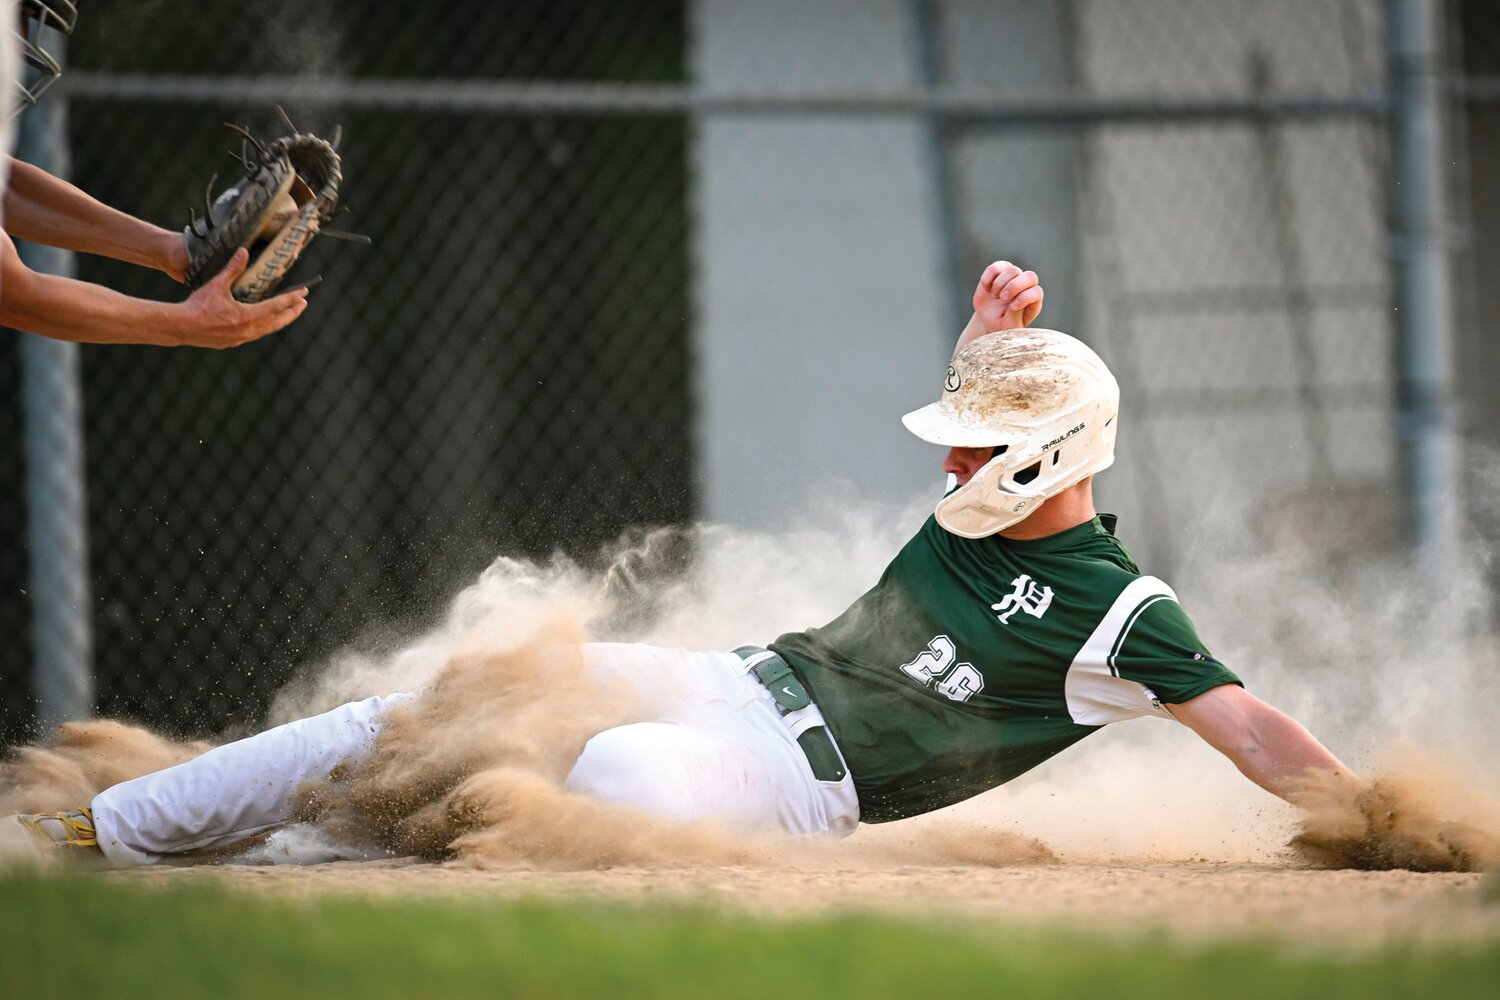 Pennridge’s Zach Swanson slides in at home ahead of the throw during the third inning.